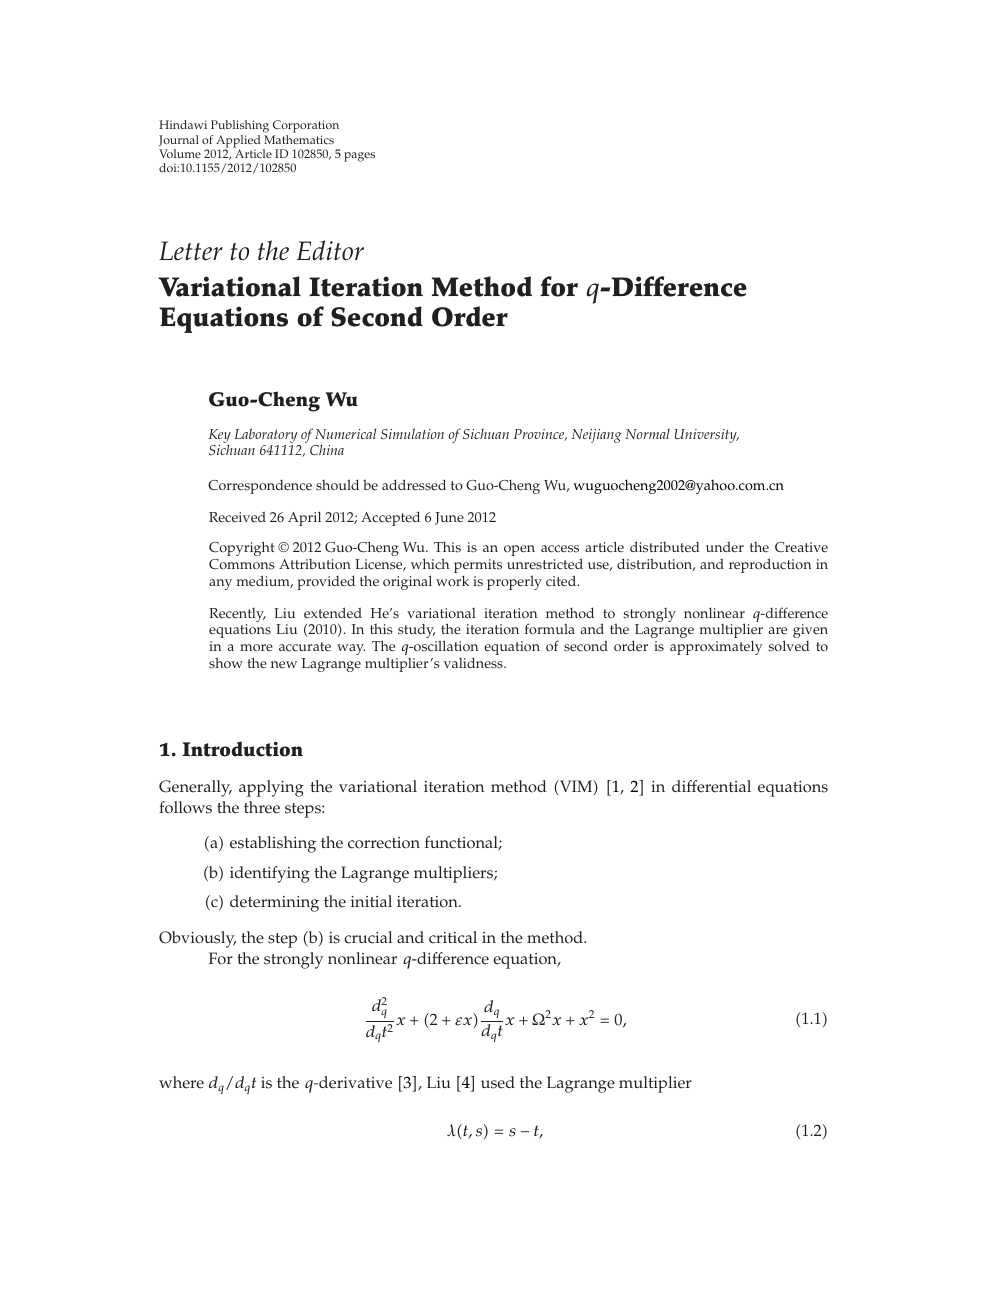 Variational Iteration Method For Q Difference Equations Of Second Order Topic Of Research Paper In Mathematics Download Scholarly Article Pdf And Read For Free On Cyberleninka Open Science Hub